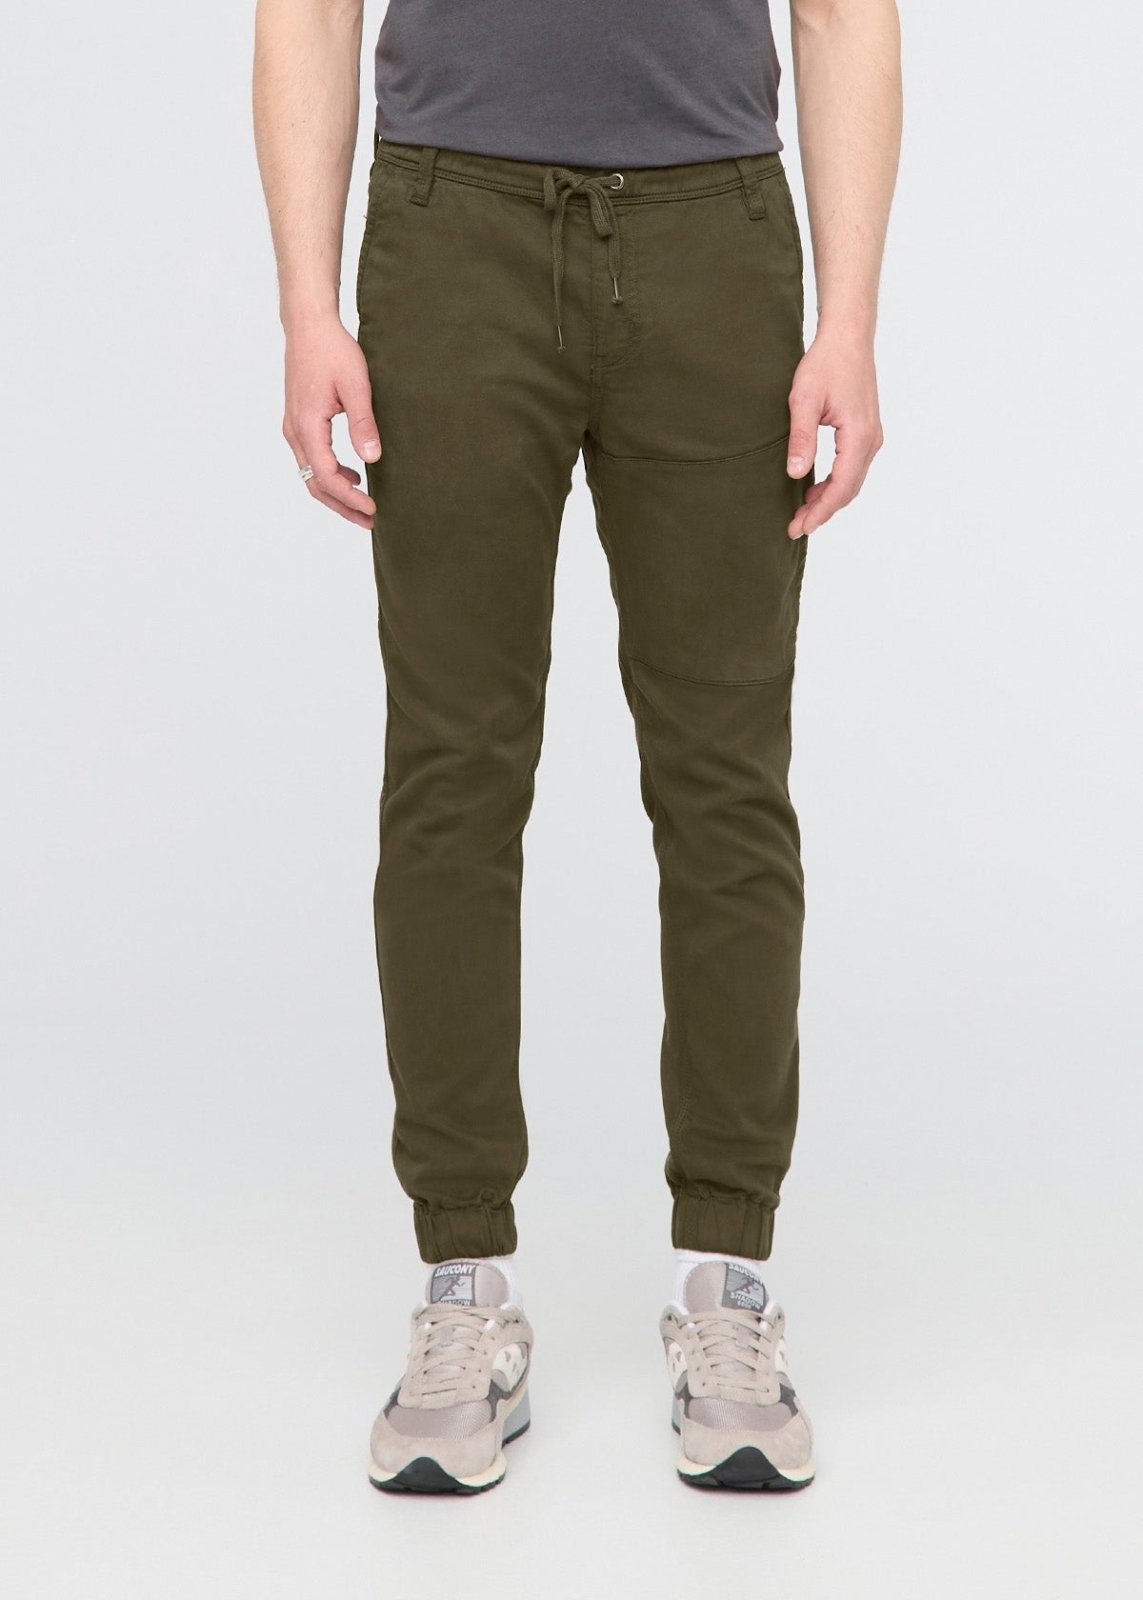 mens army green athletic jogger front